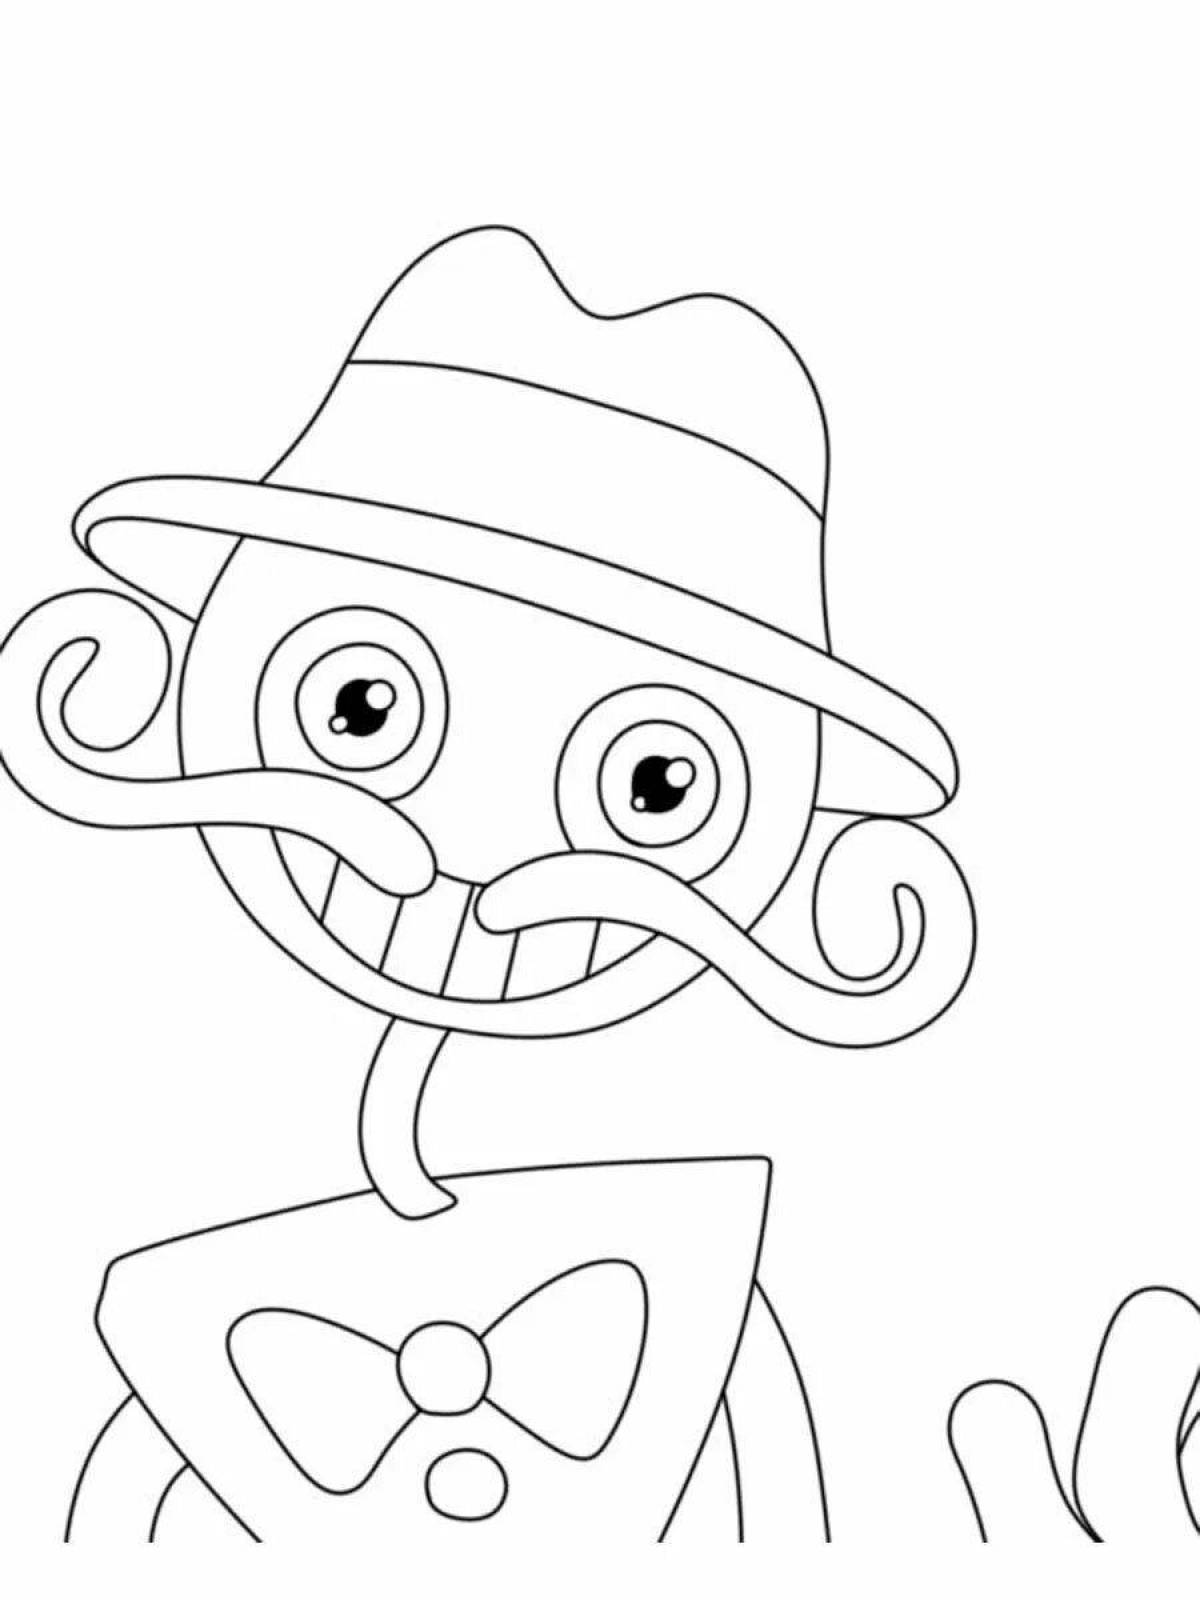 Coloring page adorable dad long legs